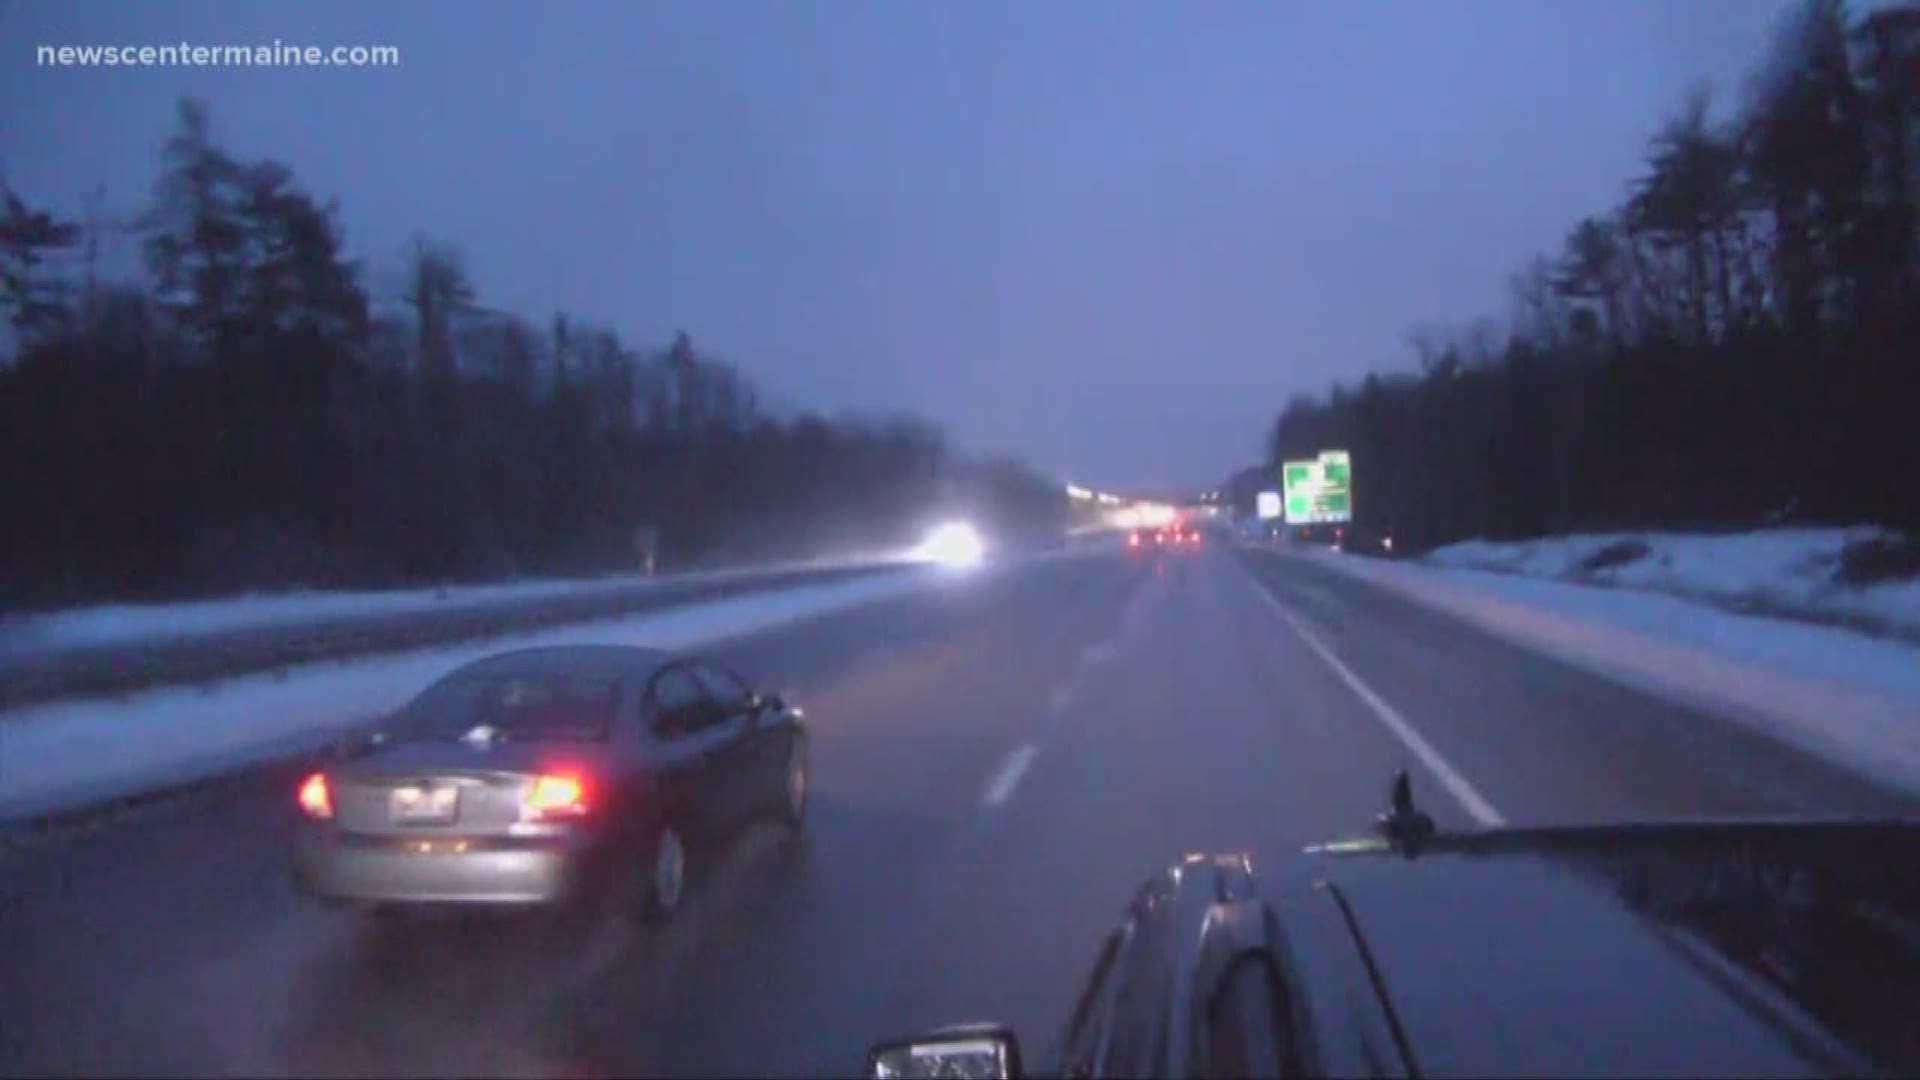 Snow turned to rain in the southern part of the state just as the commute got underway